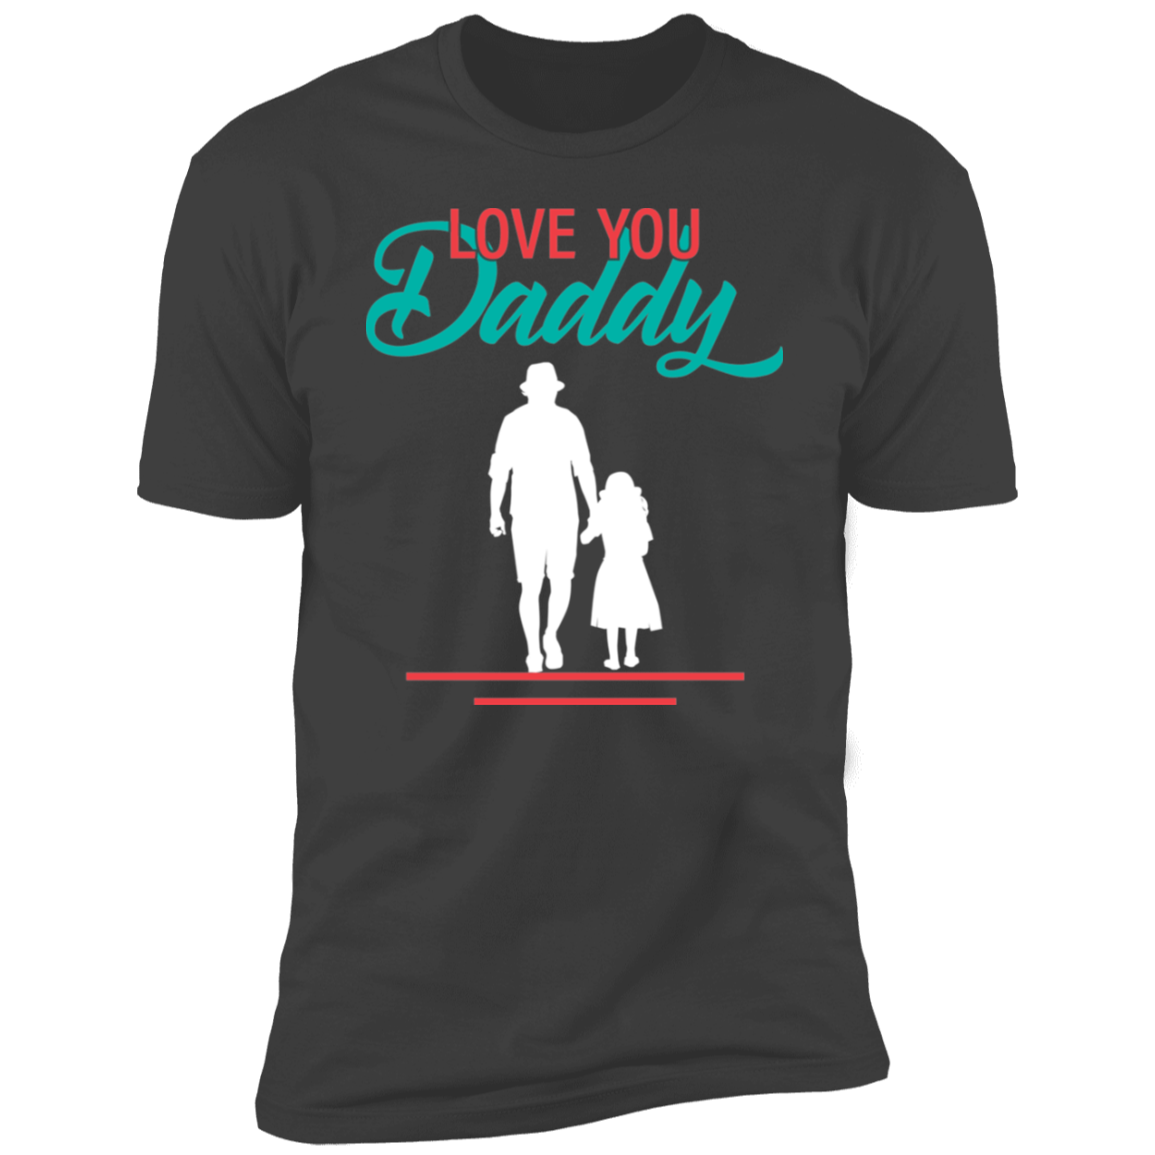 LOVE YOU DADDY-Short Sleeve T-Shirt